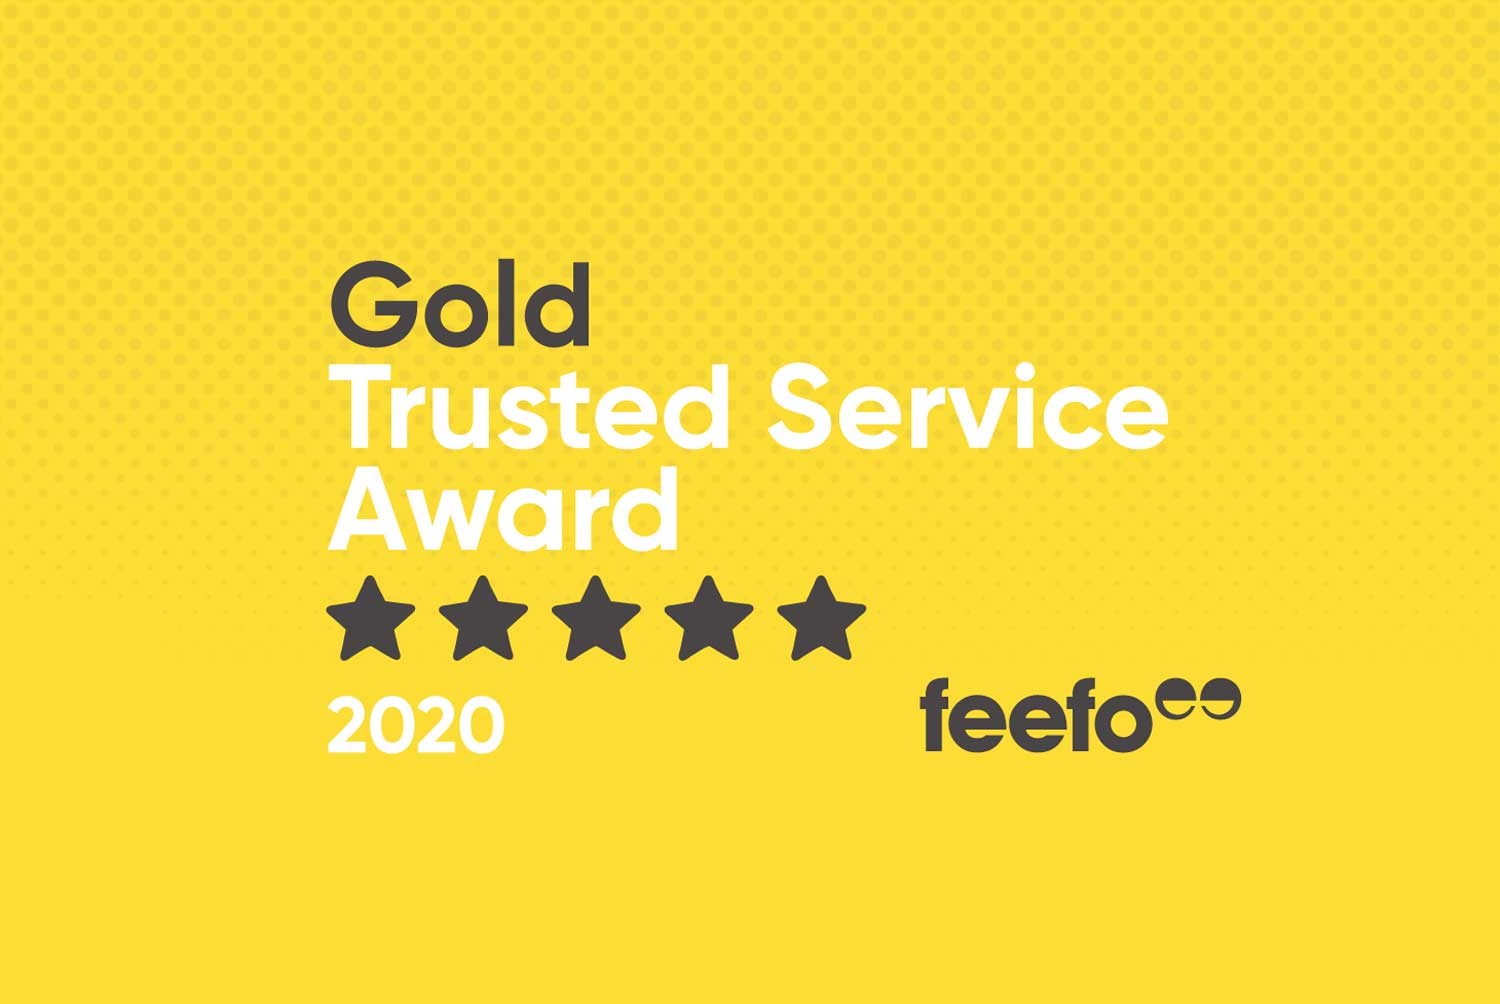 totality services make it two Feefo Gold Trusted Service Awards in a row for customer service